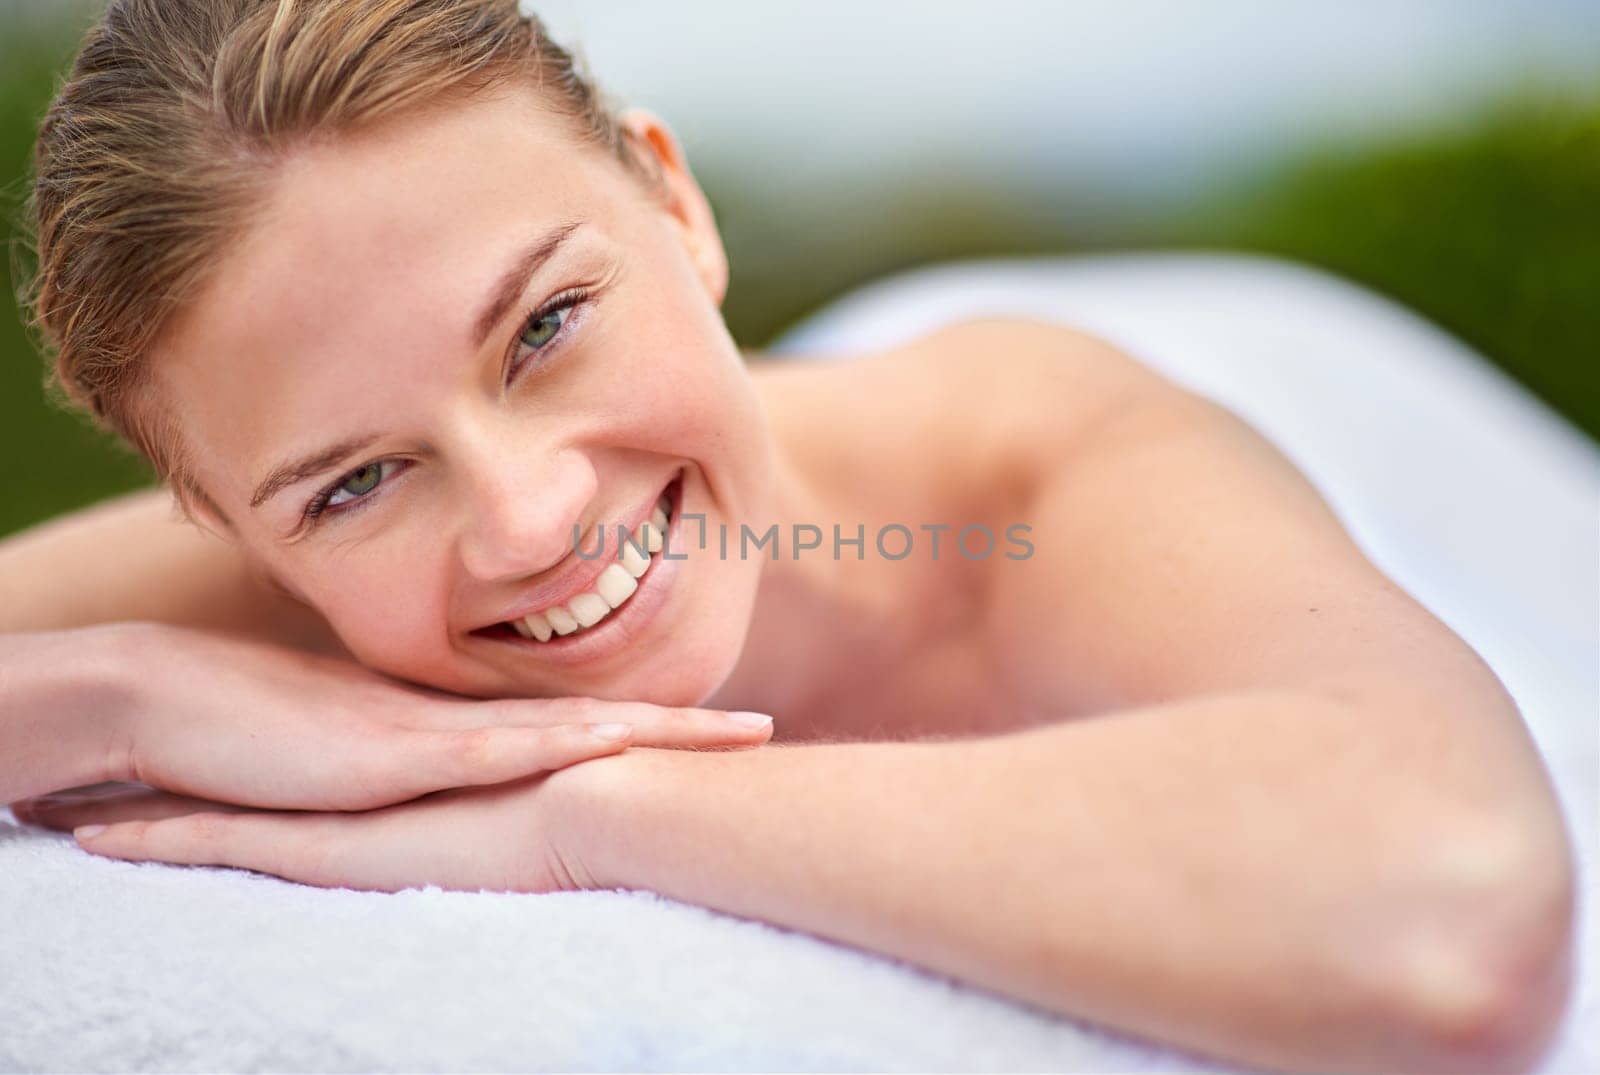 Spa, happy woman and portrait on massage bed for wellness, beauty treatment or body care. Smile, relax and female person at luxury resort for stress relief, comfort or pamper on tropical holiday.